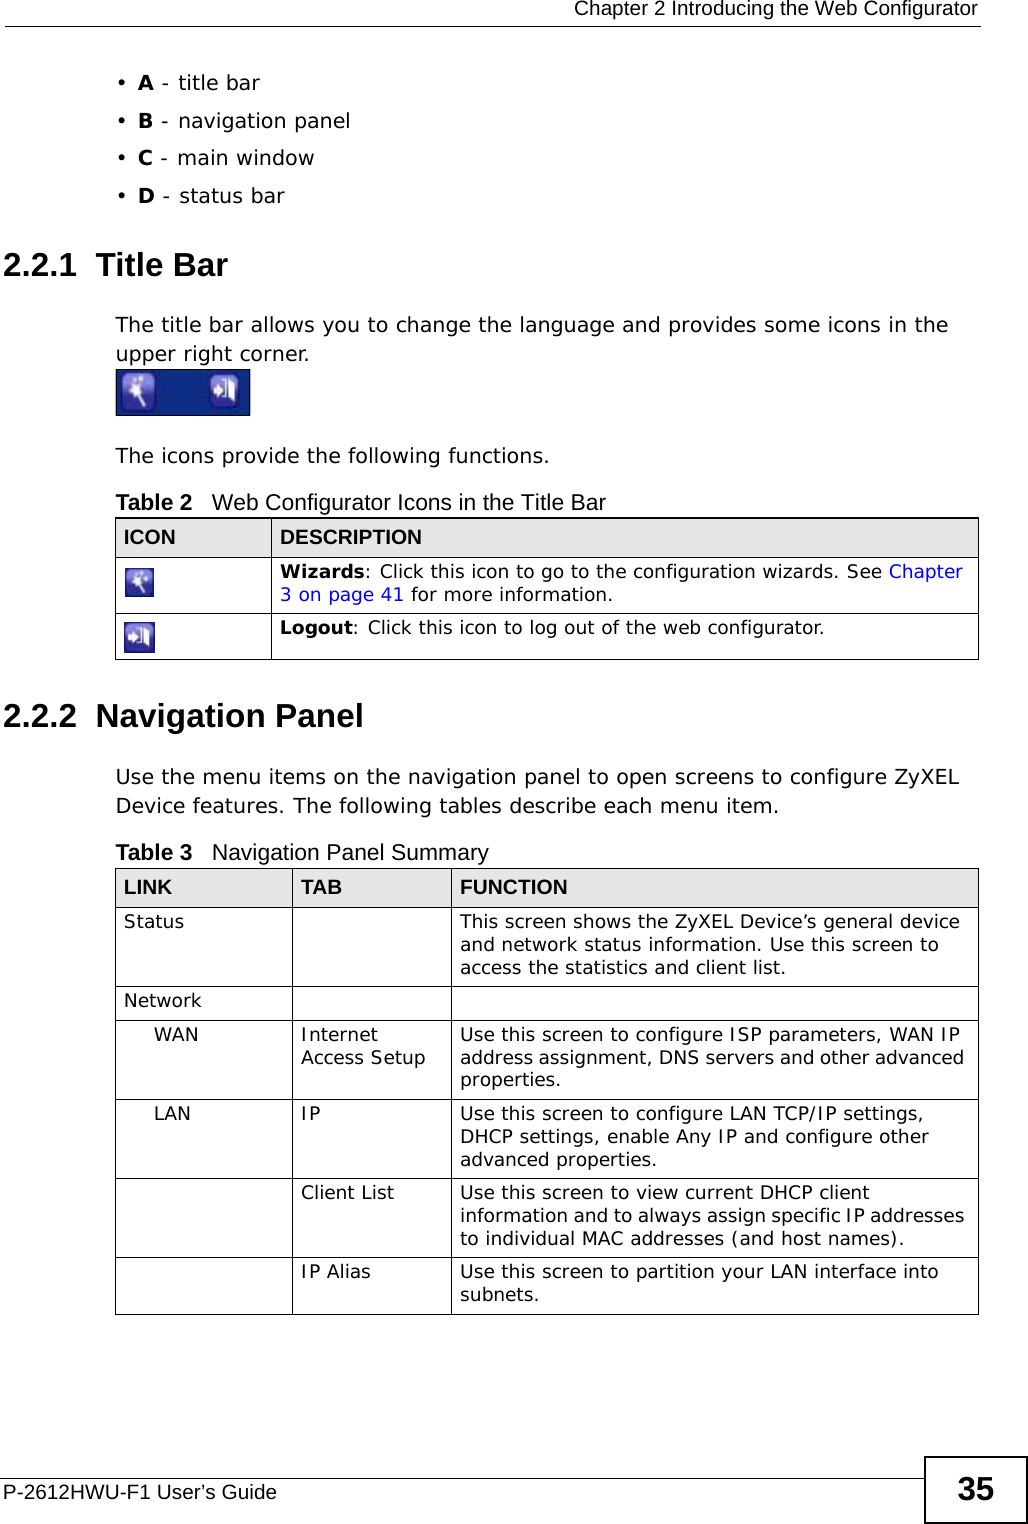  Chapter 2 Introducing the Web ConfiguratorP-2612HWU-F1 User’s Guide 35•A - title bar•B - navigation panel•C - main window•D - status bar2.2.1  Title BarThe title bar allows you to change the language and provides some icons in the upper right corner.The icons provide the following functions.2.2.2  Navigation PanelUse the menu items on the navigation panel to open screens to configure ZyXEL Device features. The following tables describe each menu item.Table 2   Web Configurator Icons in the Title BarICON  DESCRIPTIONWizards: Click this icon to go to the configuration wizards. See Chapter 3 on page 41 for more information.Logout: Click this icon to log out of the web configurator.Table 3   Navigation Panel SummaryLINK TAB FUNCTIONStatus This screen shows the ZyXEL Device’s general device and network status information. Use this screen to access the statistics and client list.NetworkWAN Internet Access Setup Use this screen to configure ISP parameters, WAN IP address assignment, DNS servers and other advanced properties.LAN IP Use this screen to configure LAN TCP/IP settings, DHCP settings, enable Any IP and configure other advanced properties.Client List Use this screen to view current DHCP client information and to always assign specific IP addresses to individual MAC addresses (and host names).IP Alias Use this screen to partition your LAN interface into subnets.